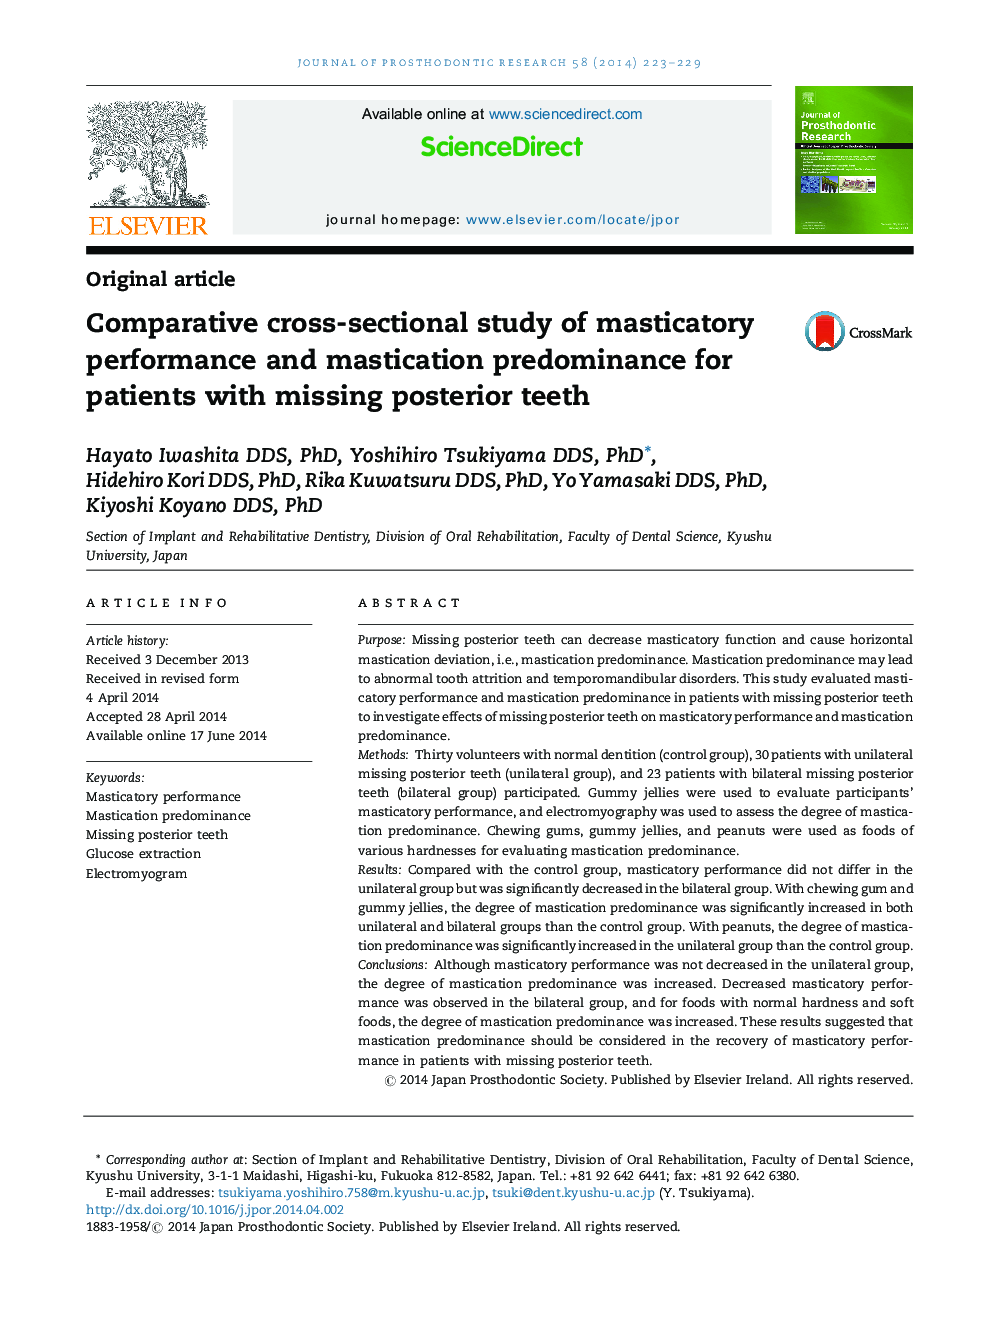 Comparative cross-sectional study of masticatory performance and mastication predominance for patients with missing posterior teeth